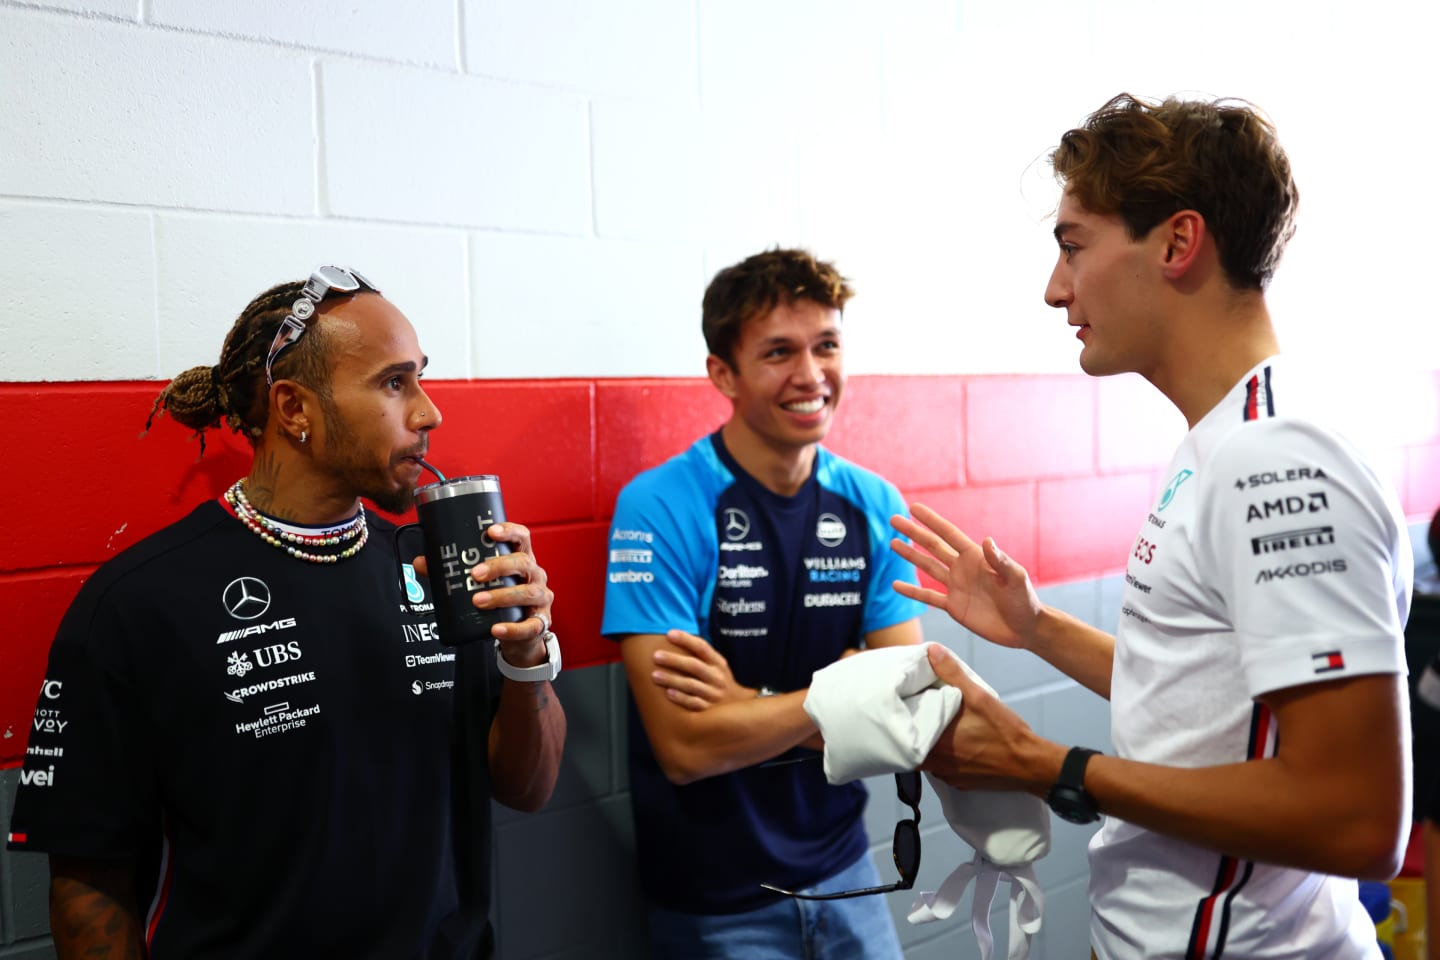 AUSTIN, TEXAS - OCTOBER 22: Lewis Hamilton of Great Britain and Mercedes speaks to George Russell of Great Britain and Mercedes and Alexander Albon of Thailand and Williams in the Pitlane prior to the F1 Grand Prix of United States at Circuit of The Americas on October 22, 2023 in Austin, Texas. (Photo by Dan Istitene - Formula 1/Formula 1 via Getty Images)